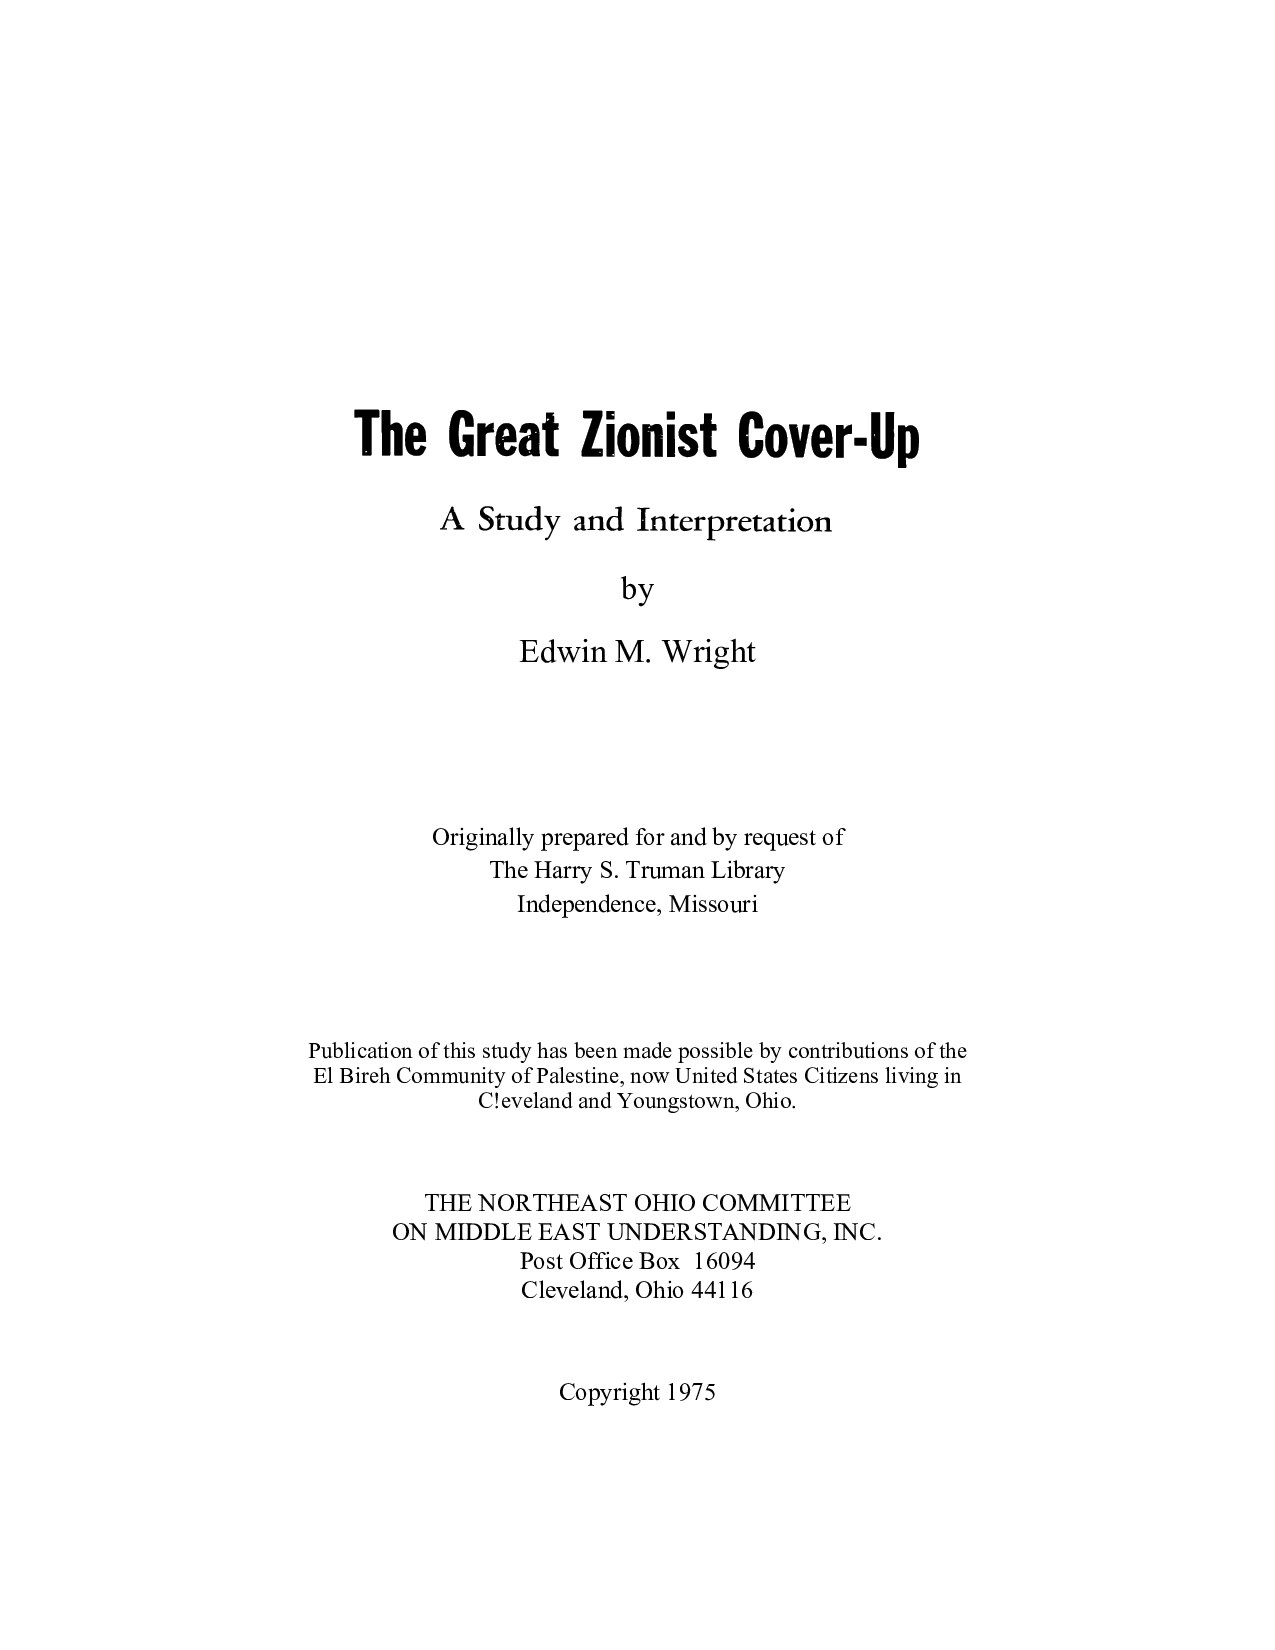 The Great Zionist Cover-Up